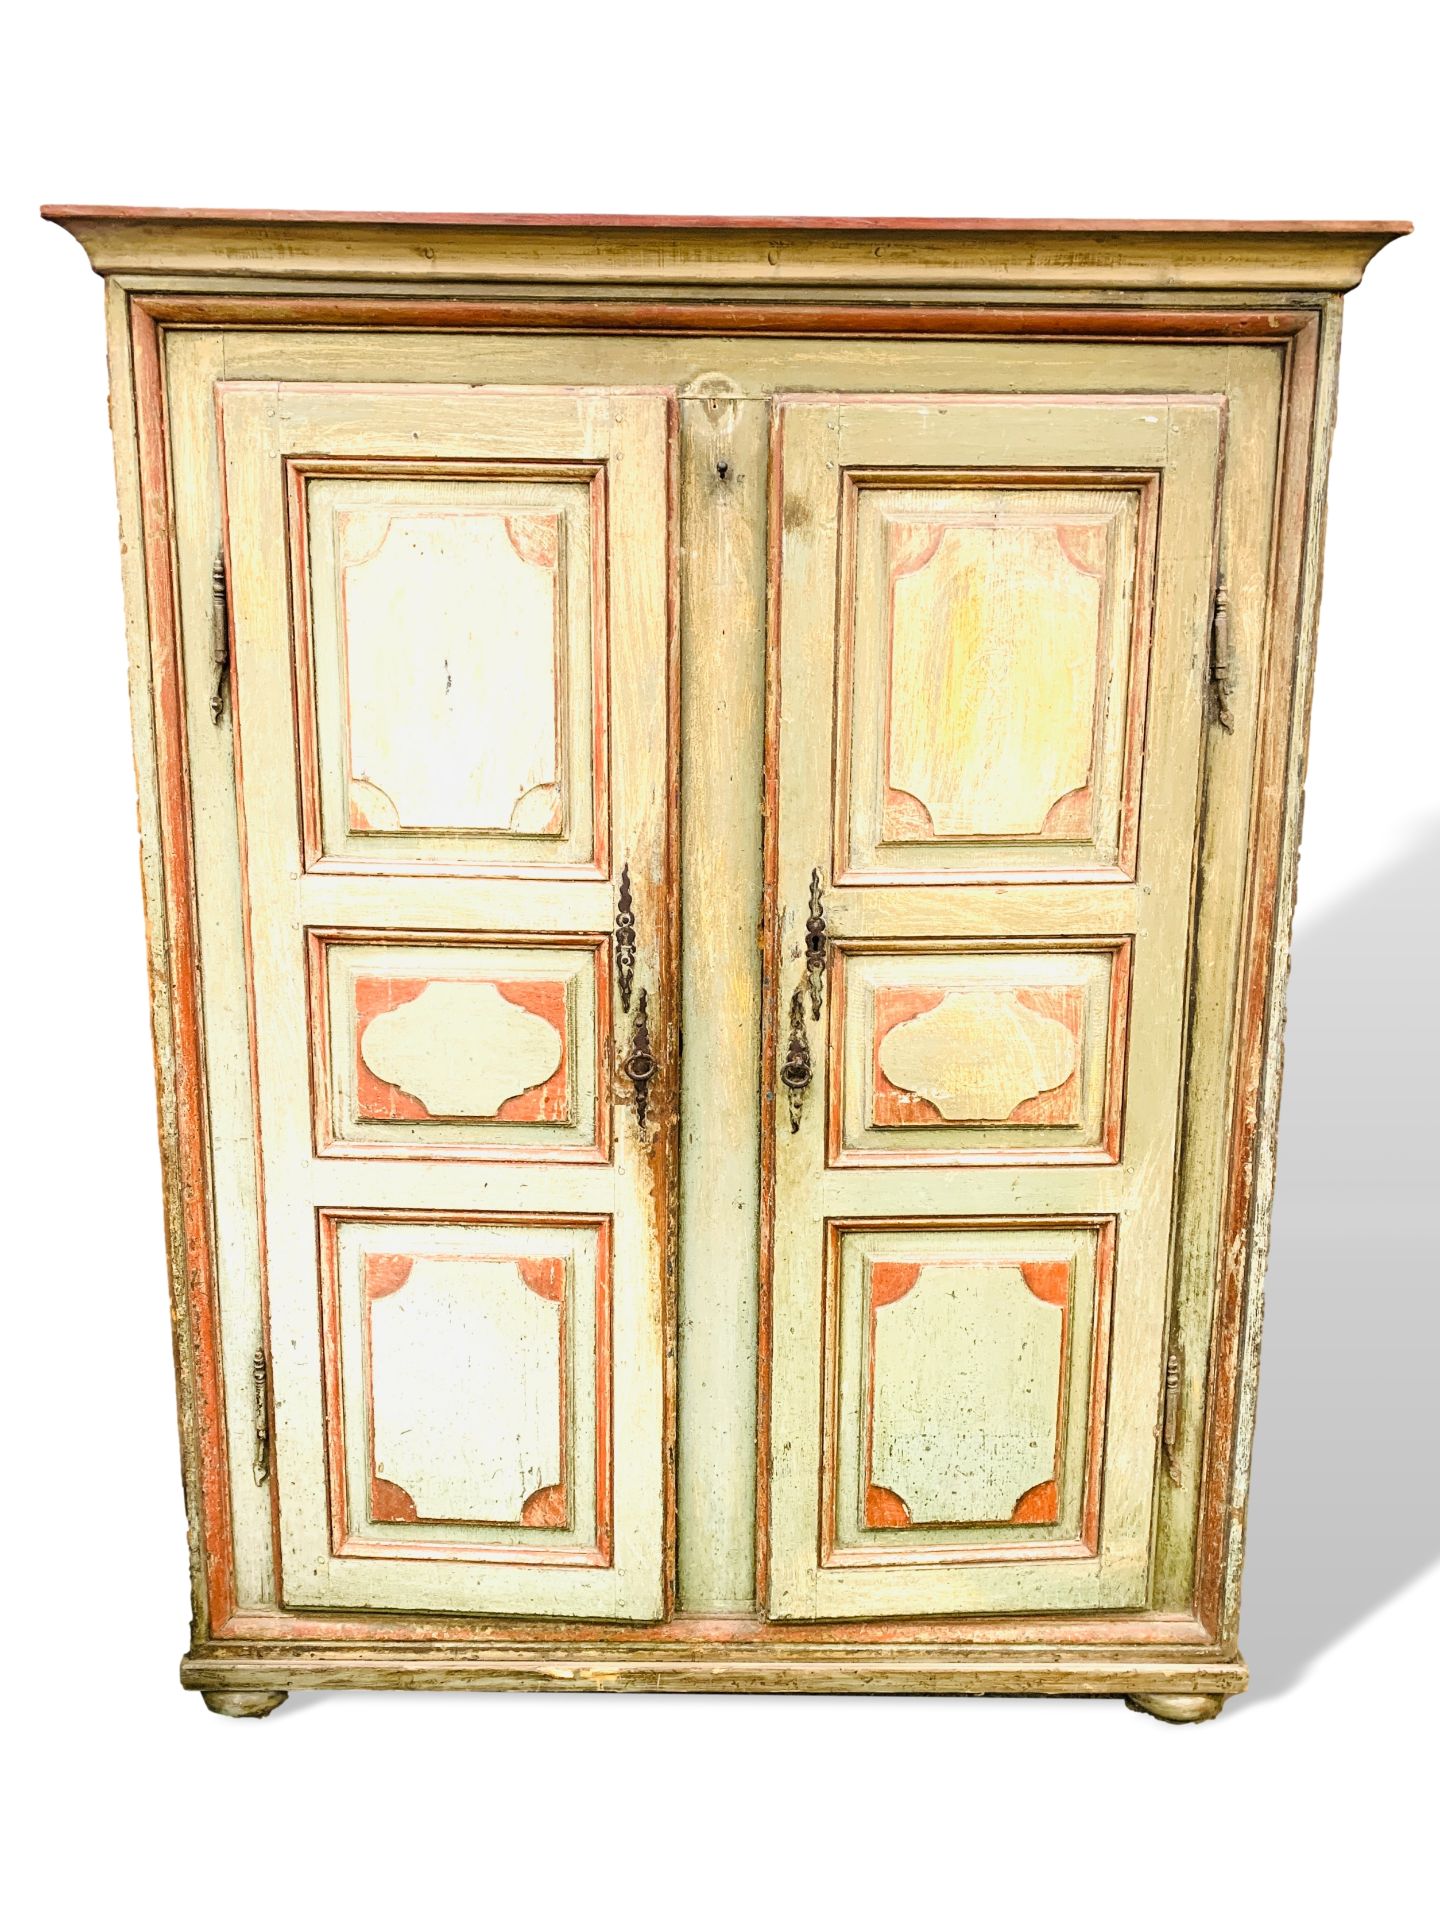 Mid-19th century French painted pine wardrobe